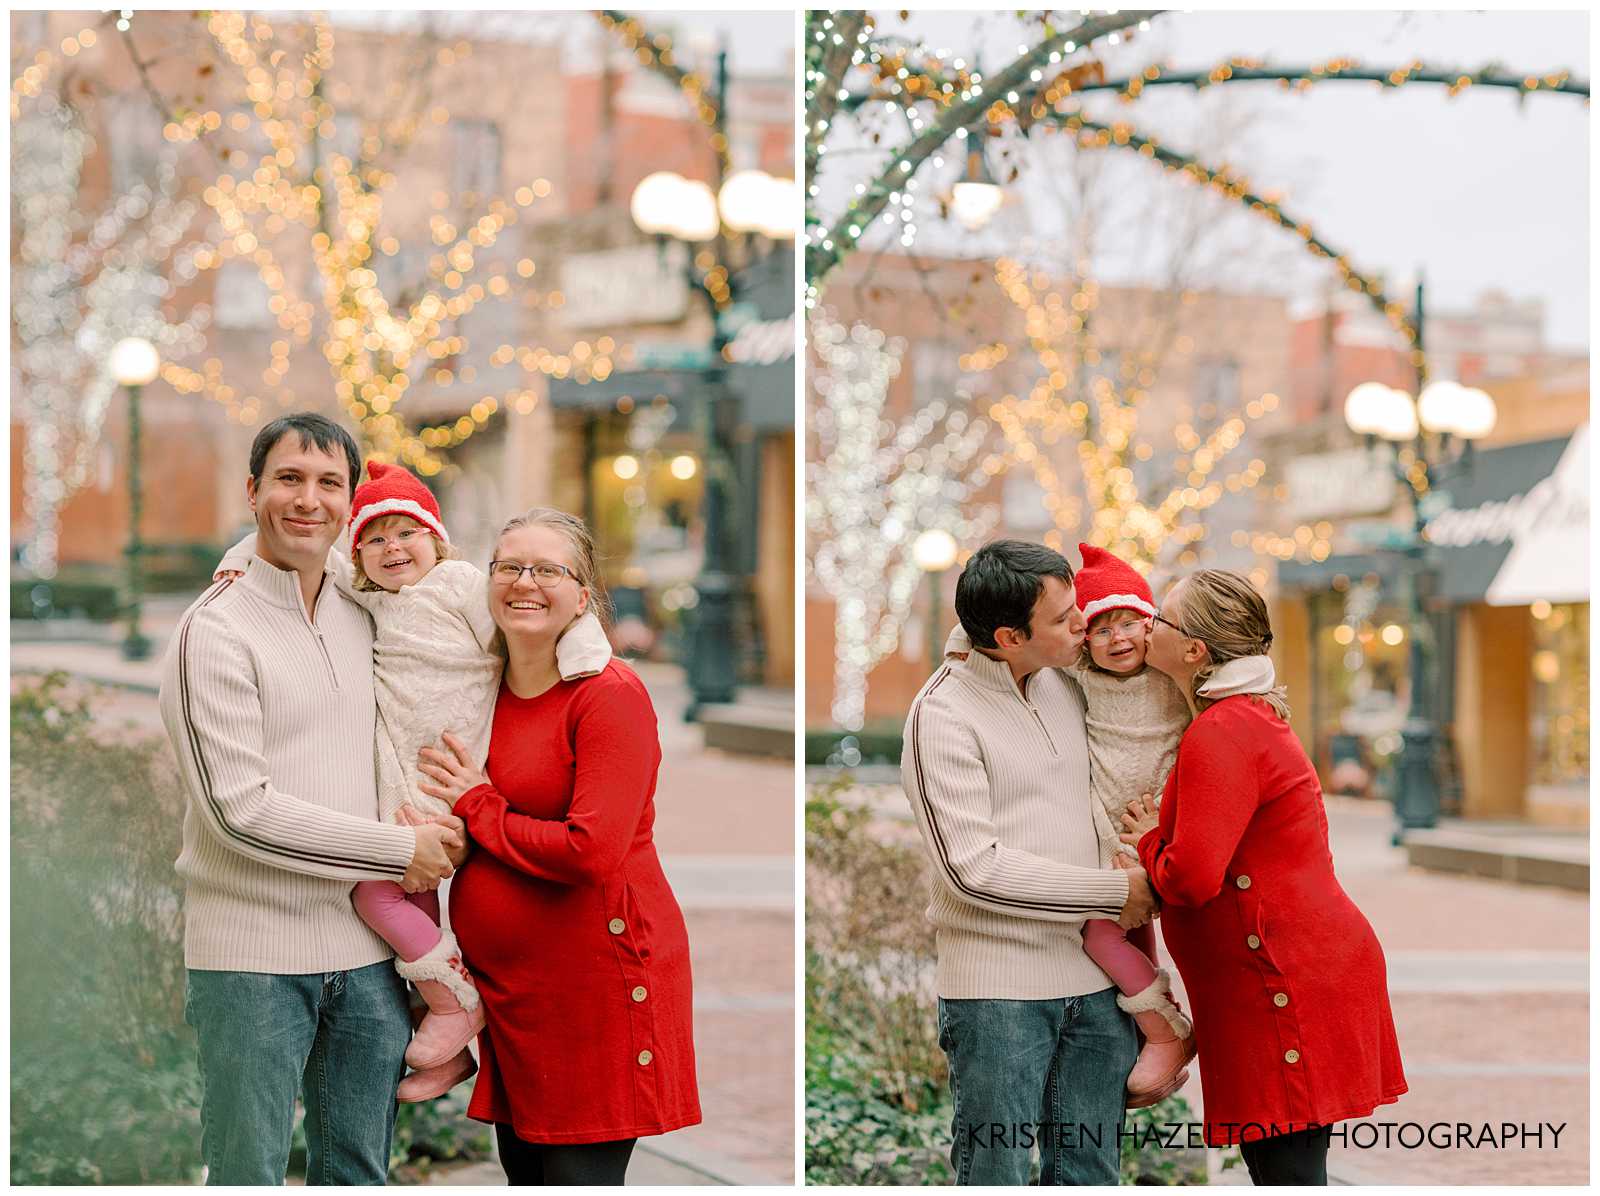 Family photoshoot with holiday lights in Chicago by Chicago portrait photographer Kristen Hazelton